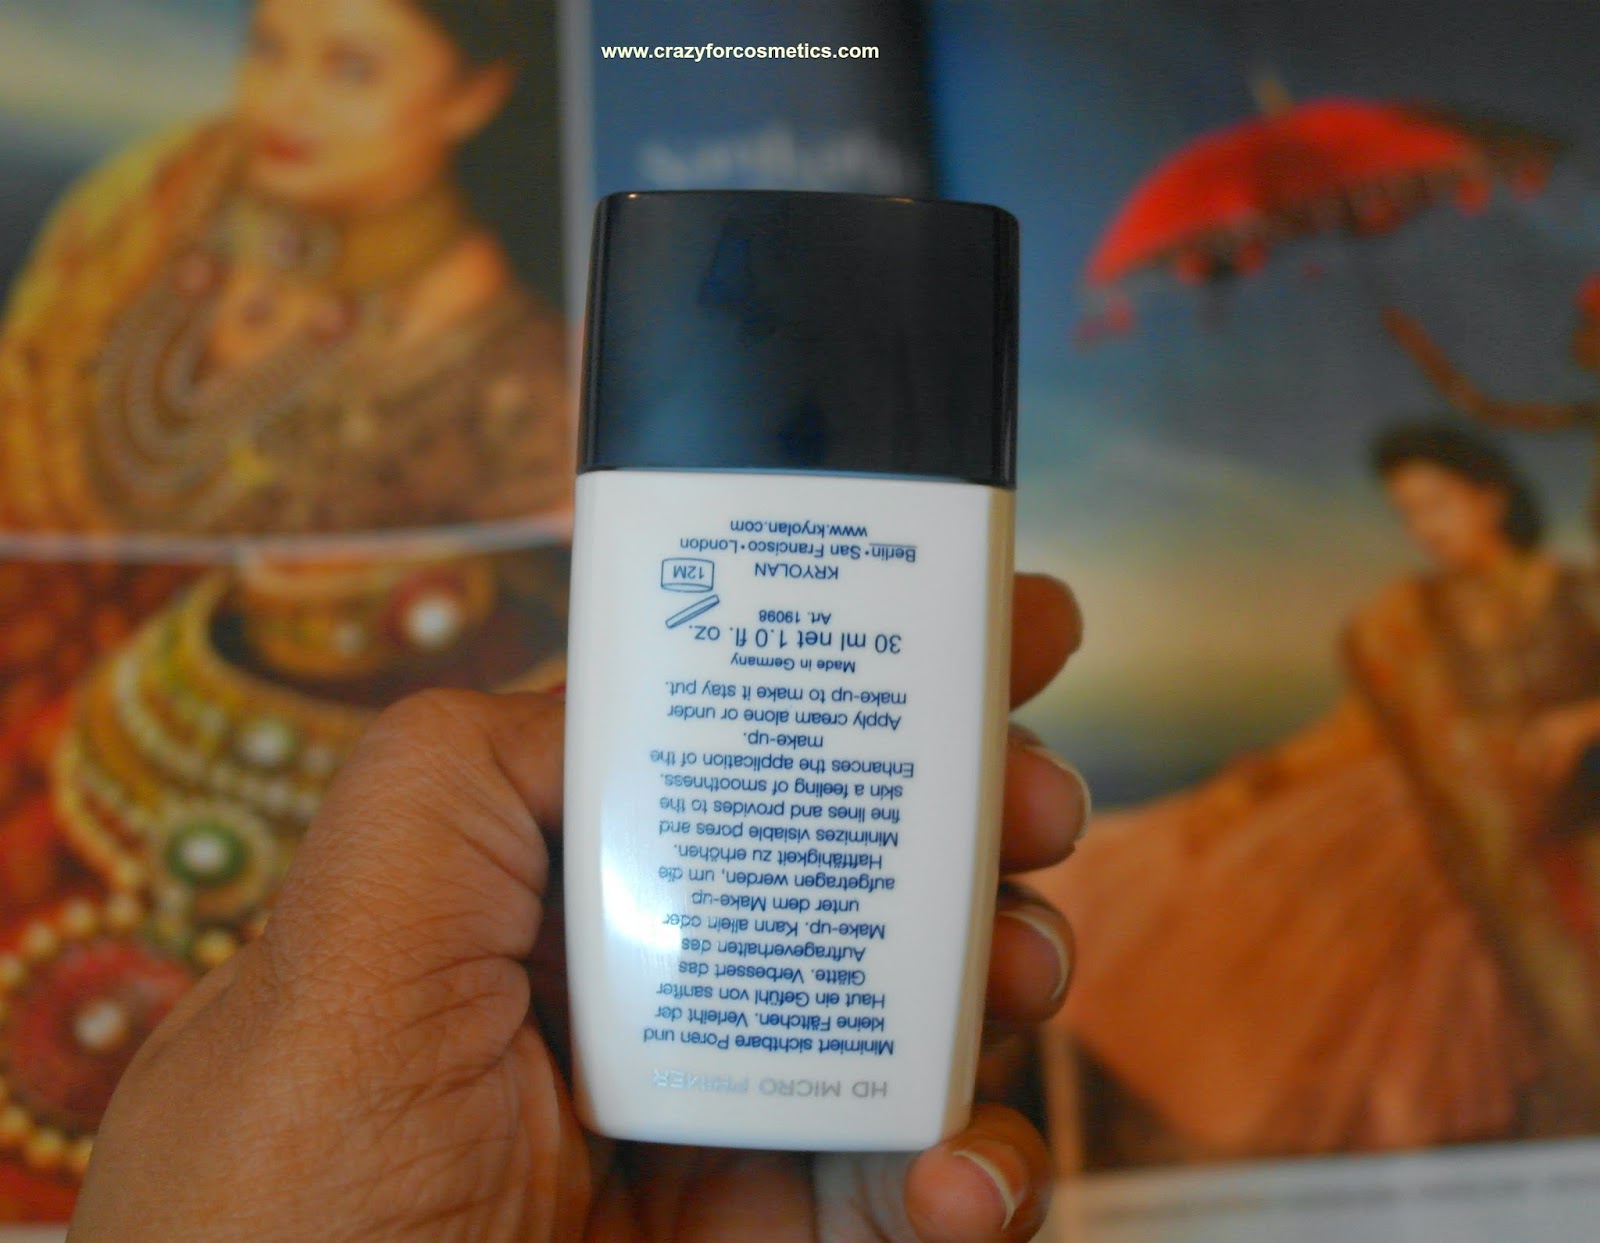 Budget face primers in India